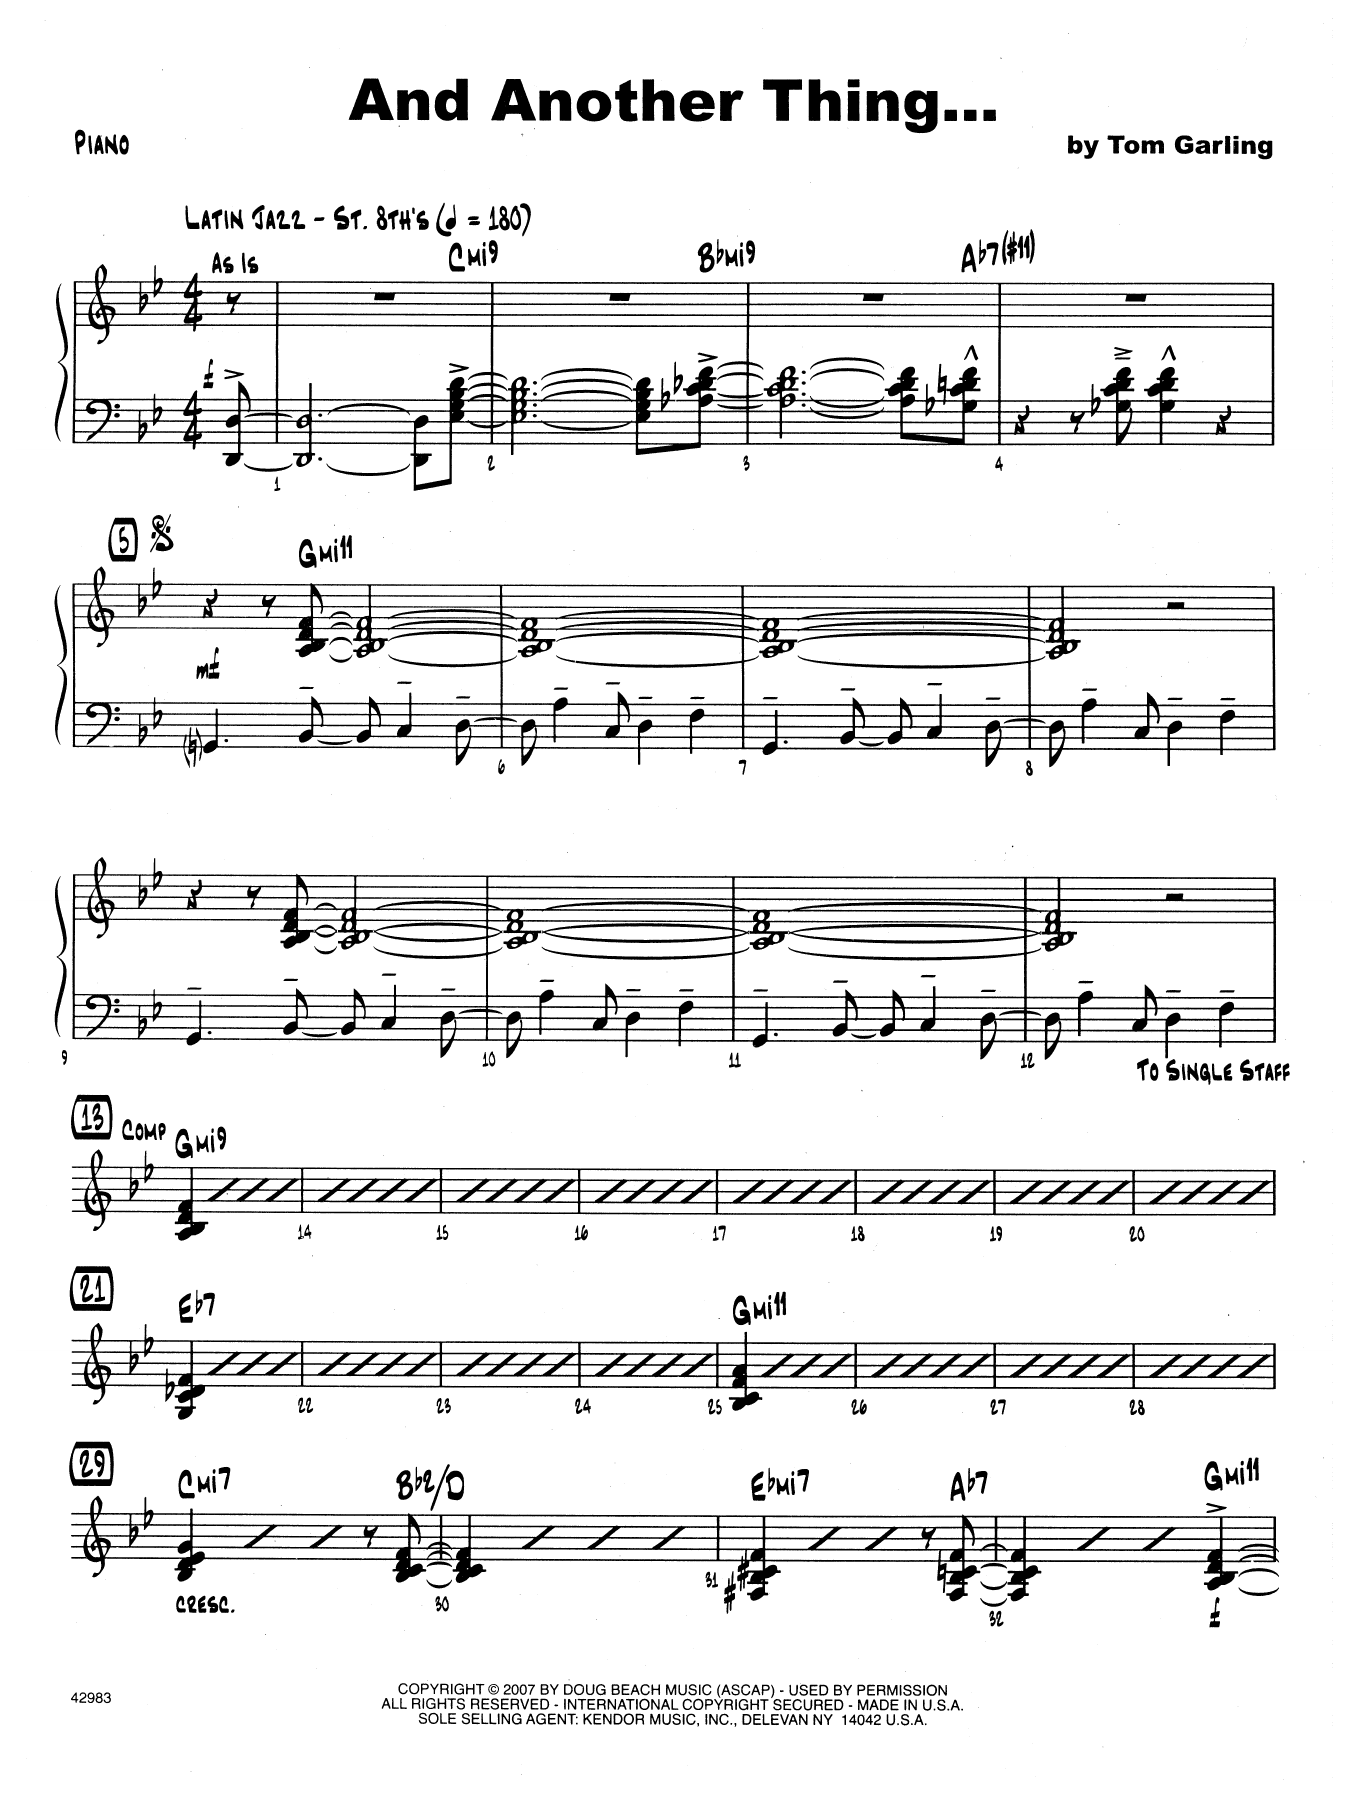 Download Tom Garling And Another Thing - Piano Sheet Music